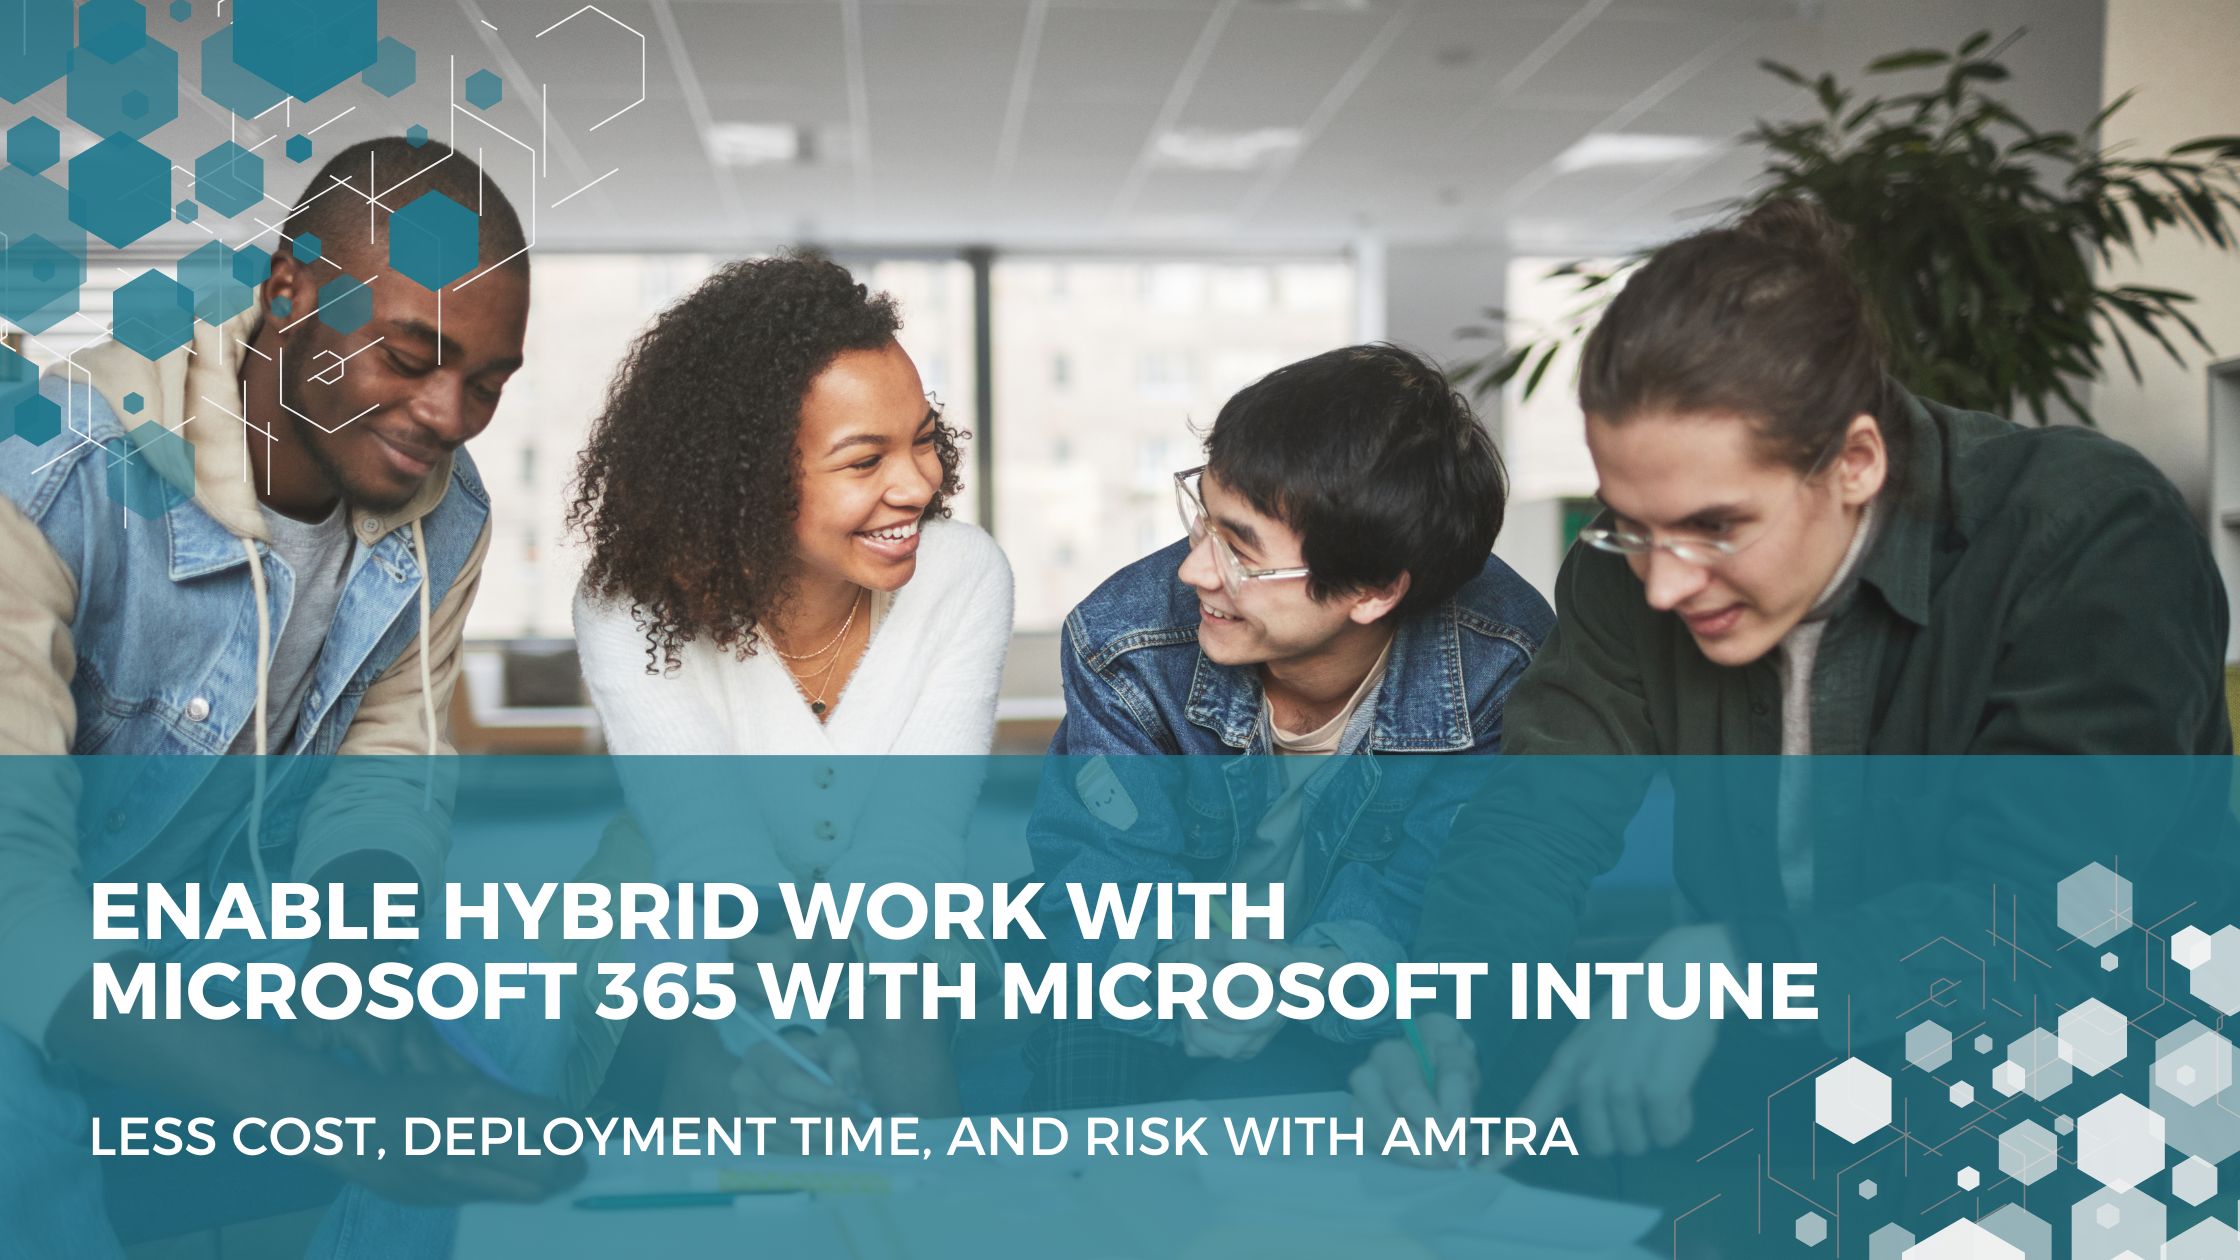 Enable hybrid work with Microsoft 365 with Microsoft Intune